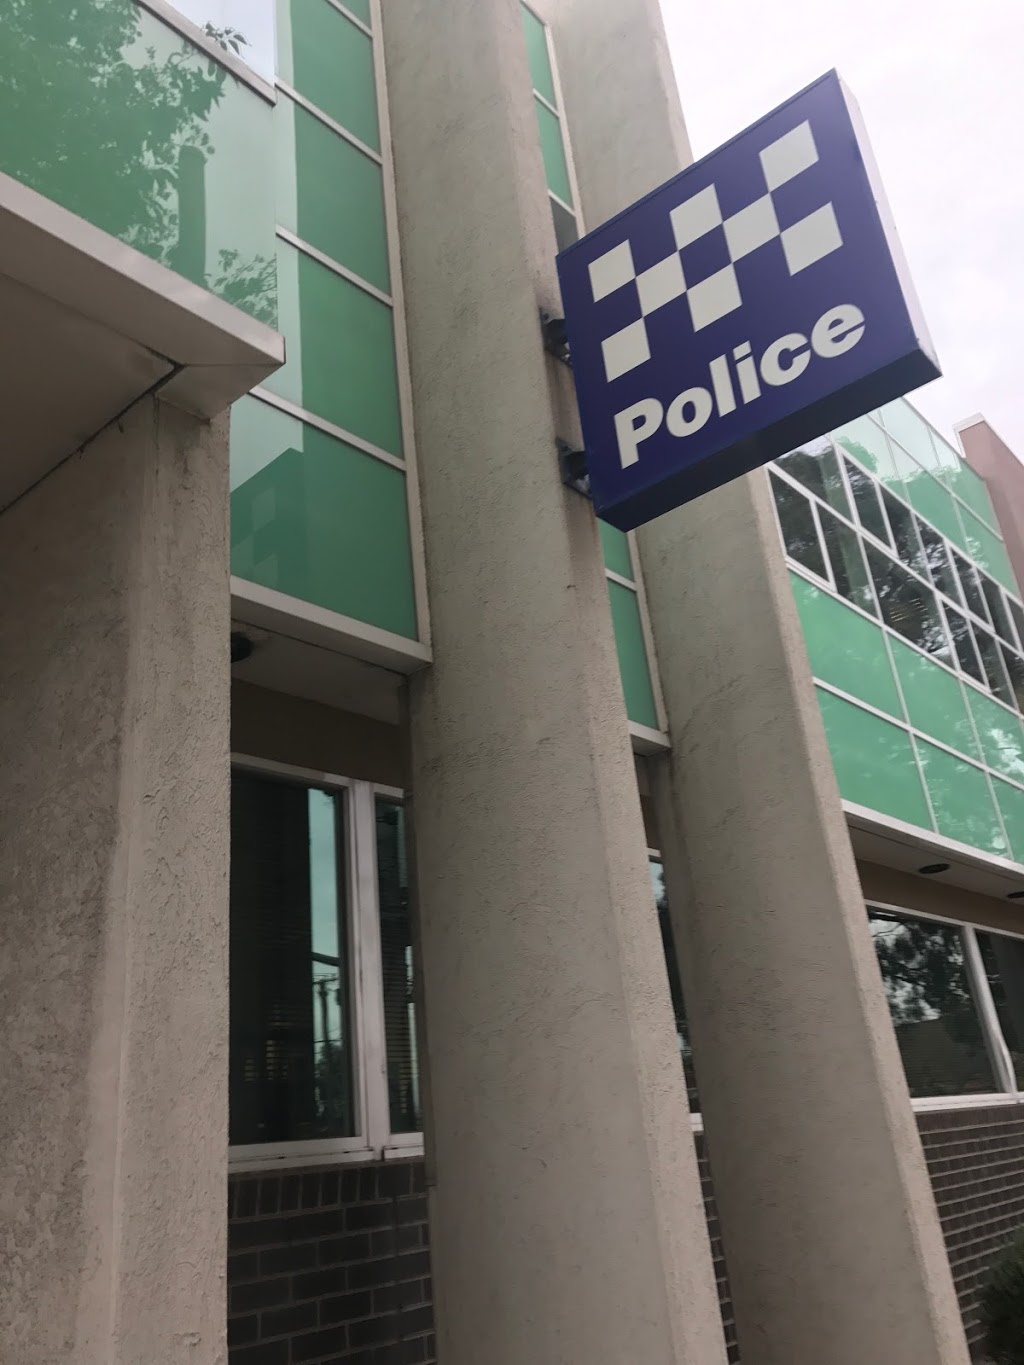 Footscray Police Station | police | 66 Hyde St, Footscray VIC 3011, Australia | 0383989800 OR +61 3 8398 9800